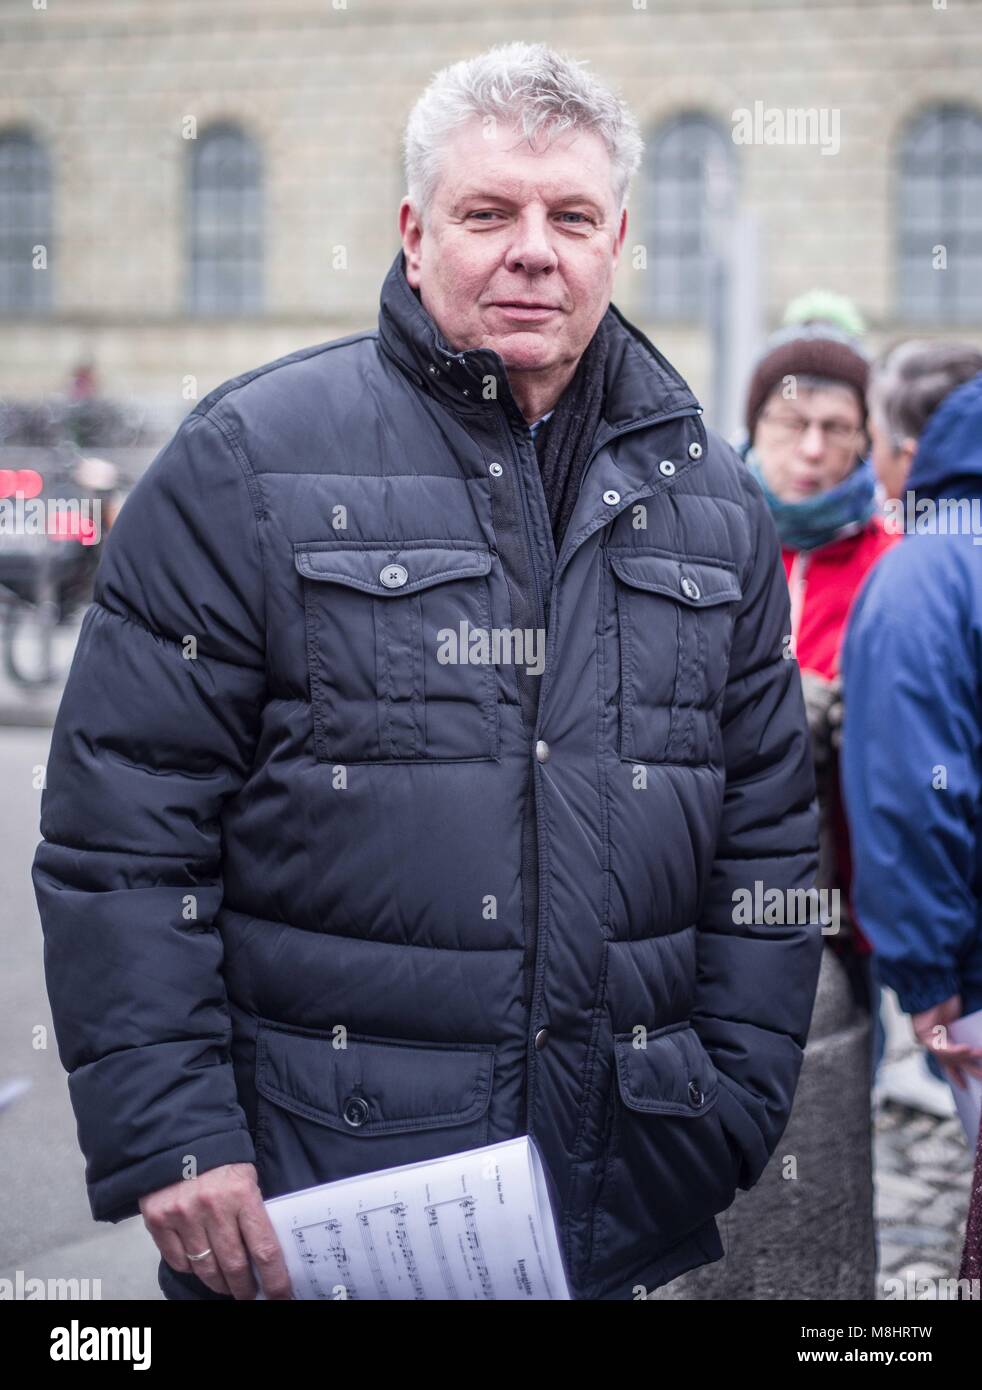 Munich, Bavaria, Germany. 17th Mar, 2018. Munich mayor Dieter Reiter. Protesting against the arrival of Pegida Dresden's Lutz Bachmann and Sigfried Daebritz in Munich, no less than three demonstrations were organized by the city, including a Muenchen ist Bunt and Bellevue di Monaco protest at Max Joseph Platz. At this demonstration, choirs were in attendance, along with celebrities, politicians, and other prominent Muenchners dressed as doctors in order to tell Pegida that they will help them go back to Dresden. Participants: Syrischer Friedenschor, MÃ¼nchner Kneipenchor, Der Chor der Sc Stock Photo